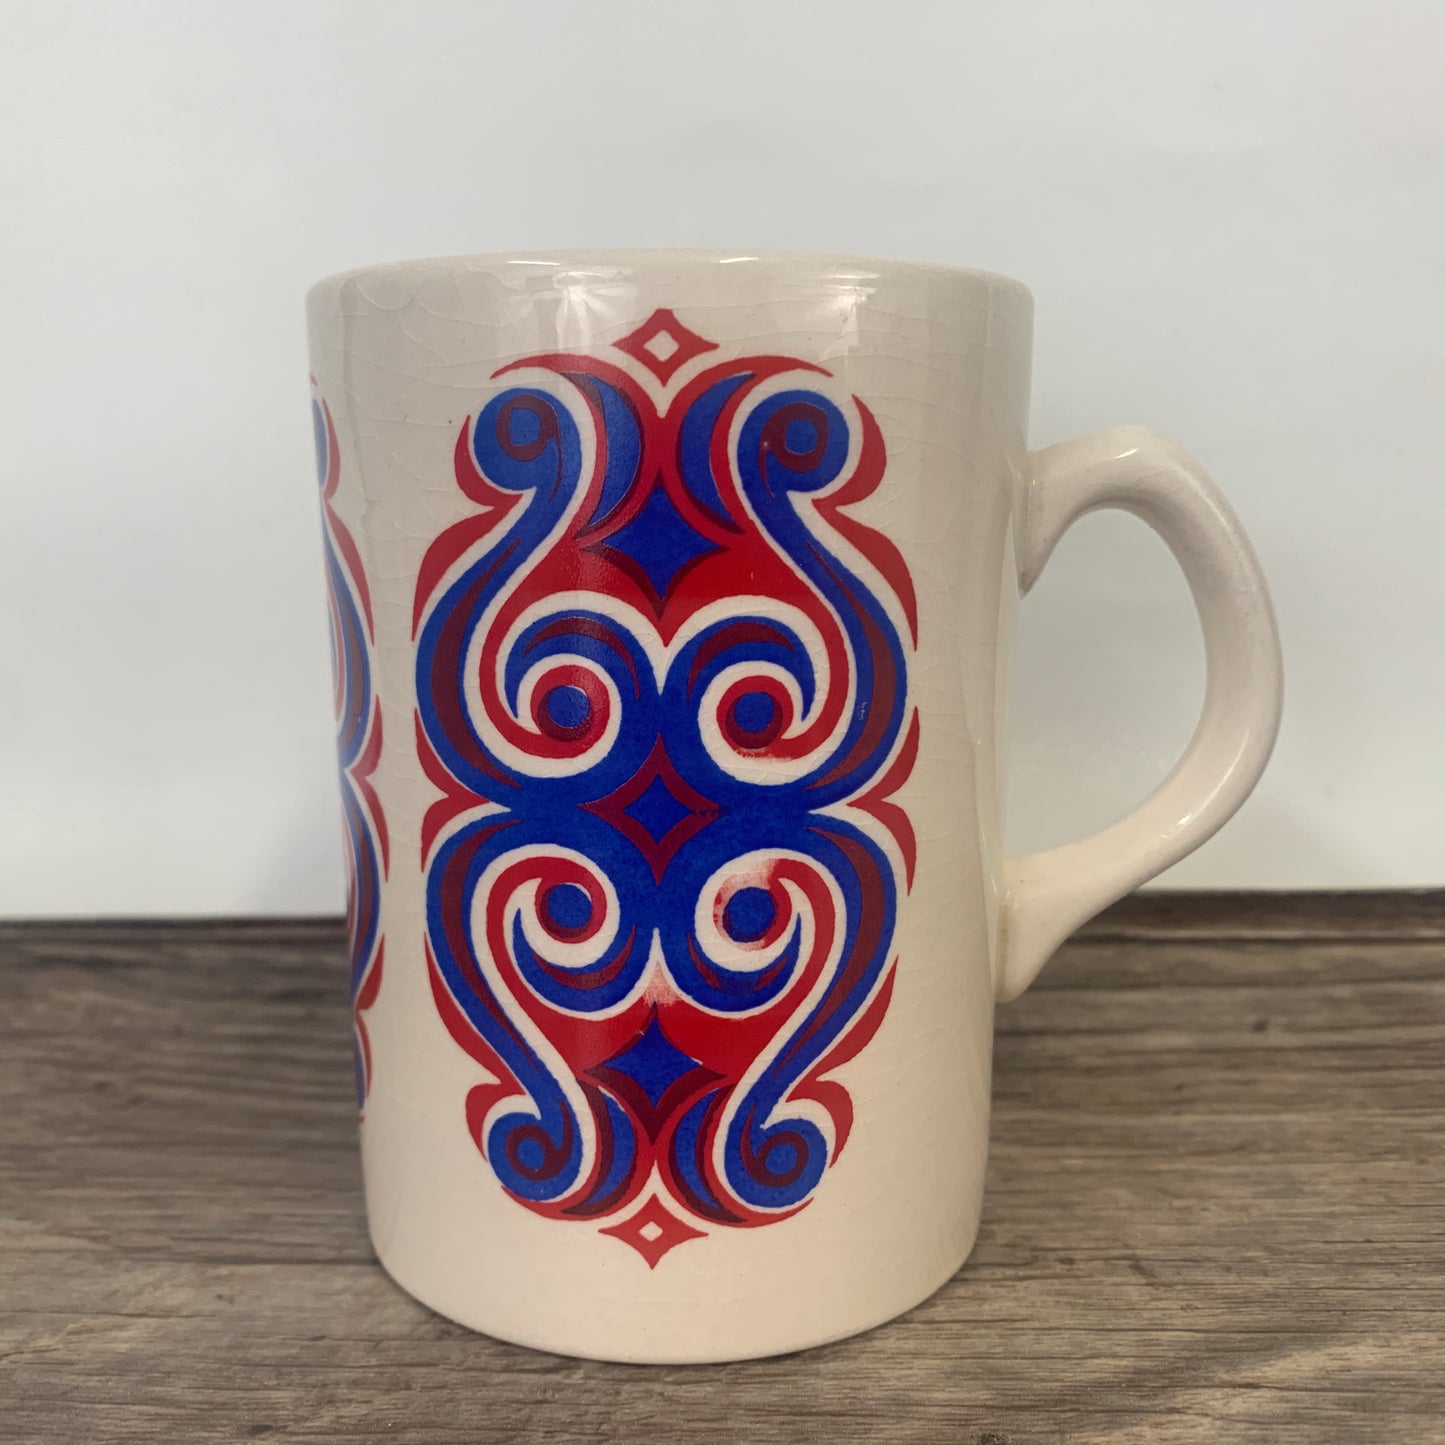 Staffordshire Potteries Tall Coffee Mug with Red and Blue Design